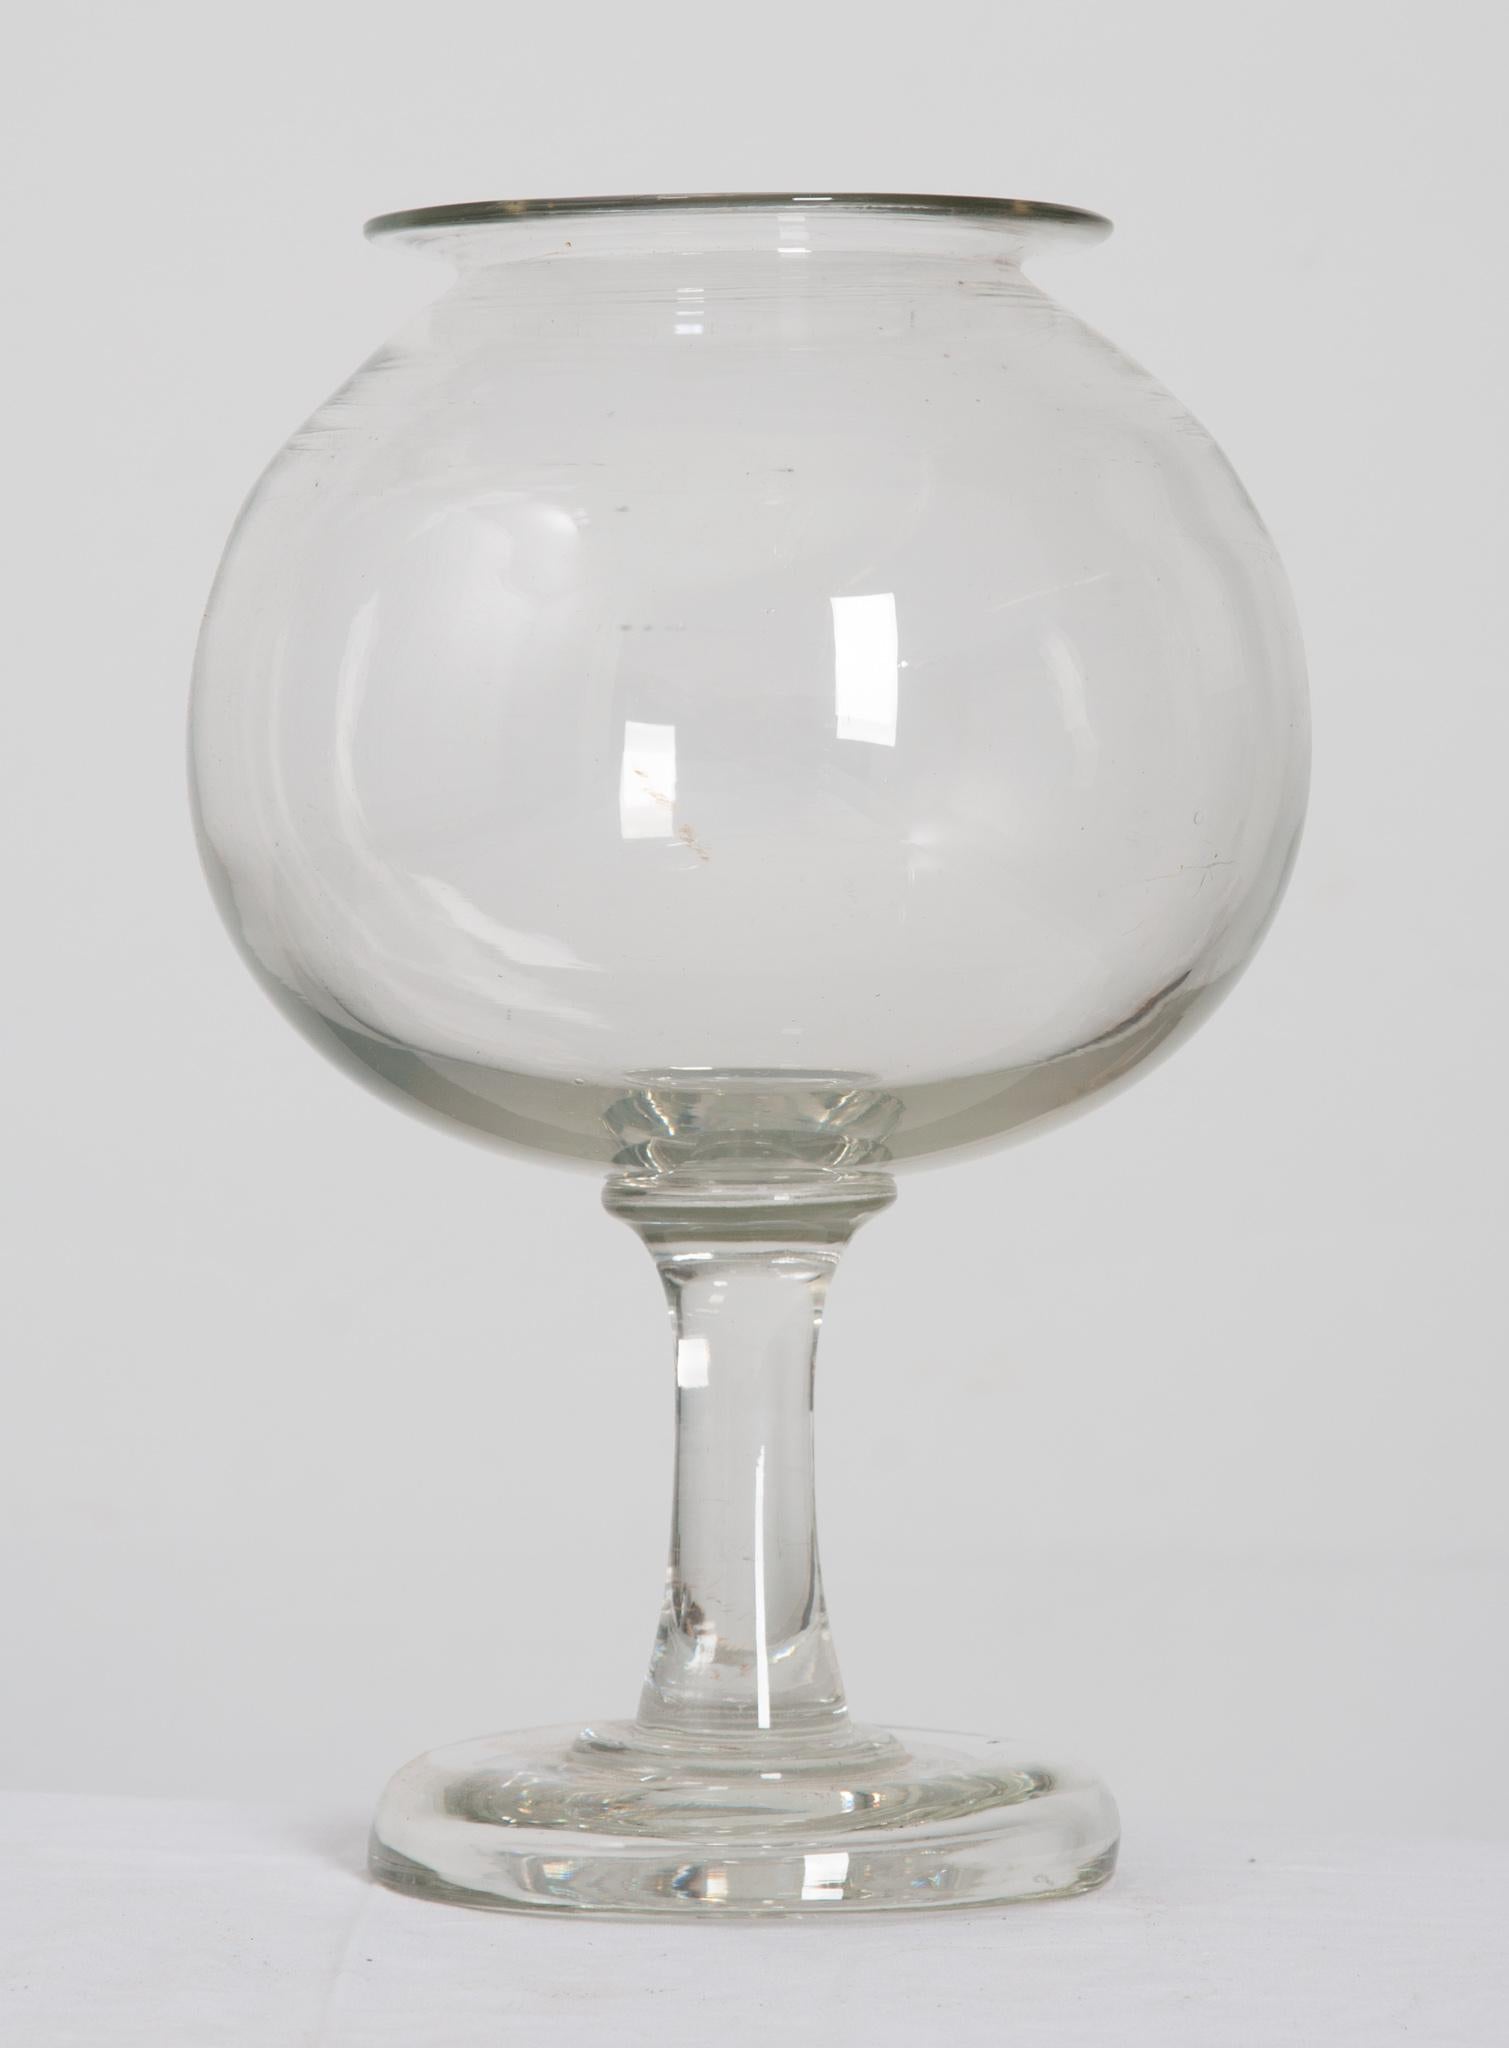 This clear glass fishbowl is the perfect antique for any home! Made from thick glass the lipped bowl is elevated by a sturdy pedestal of glass. Goldfish bowls were incredibly popular in Victorian era England. Finding one in this condition, without